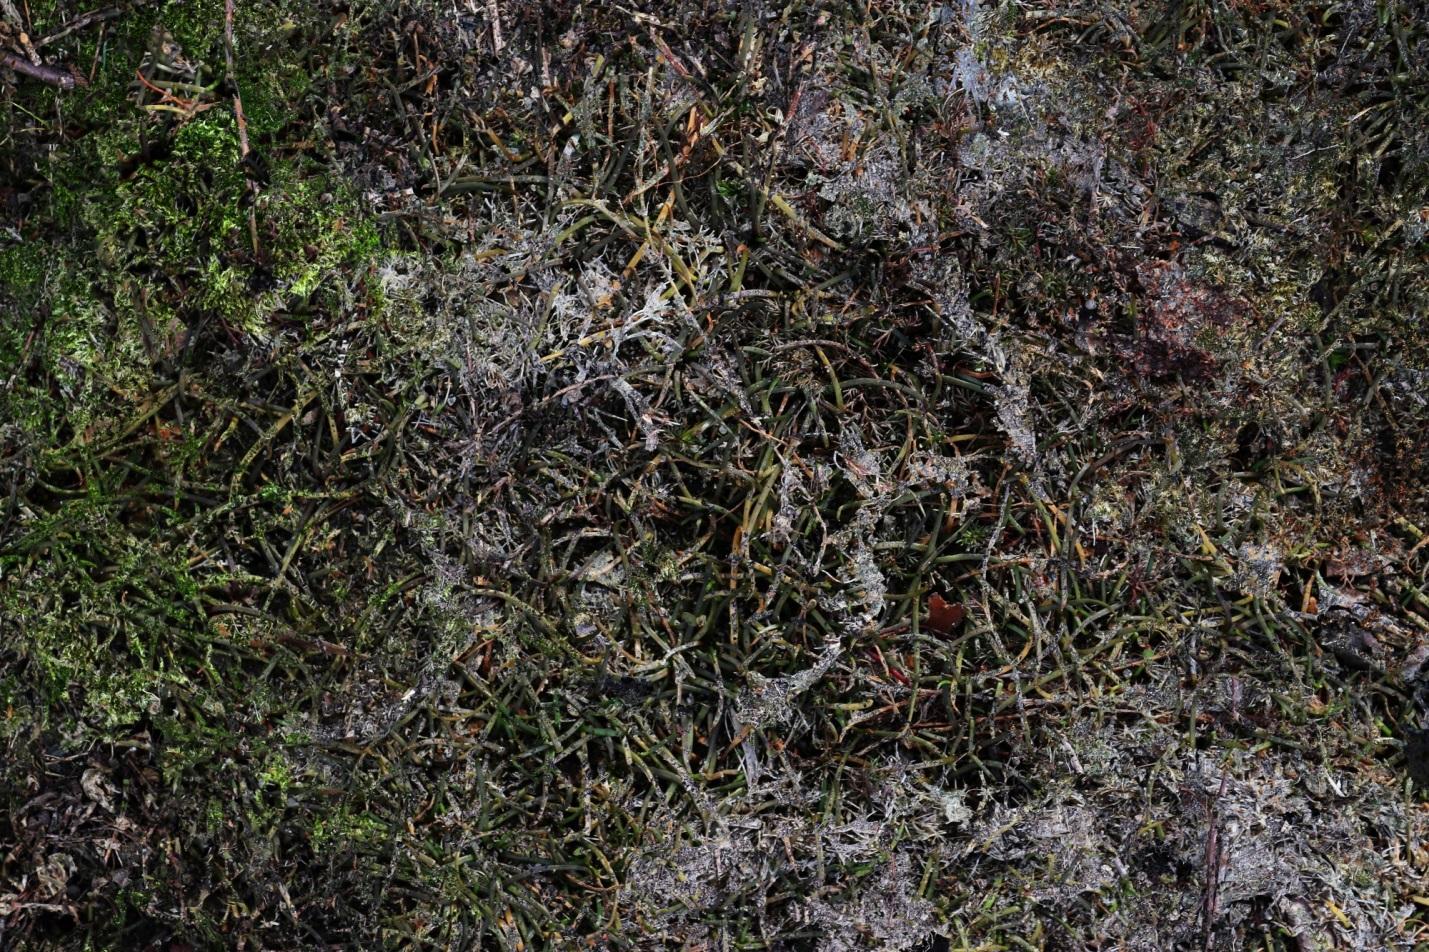 A close up of a moss covered rock with white fungus.